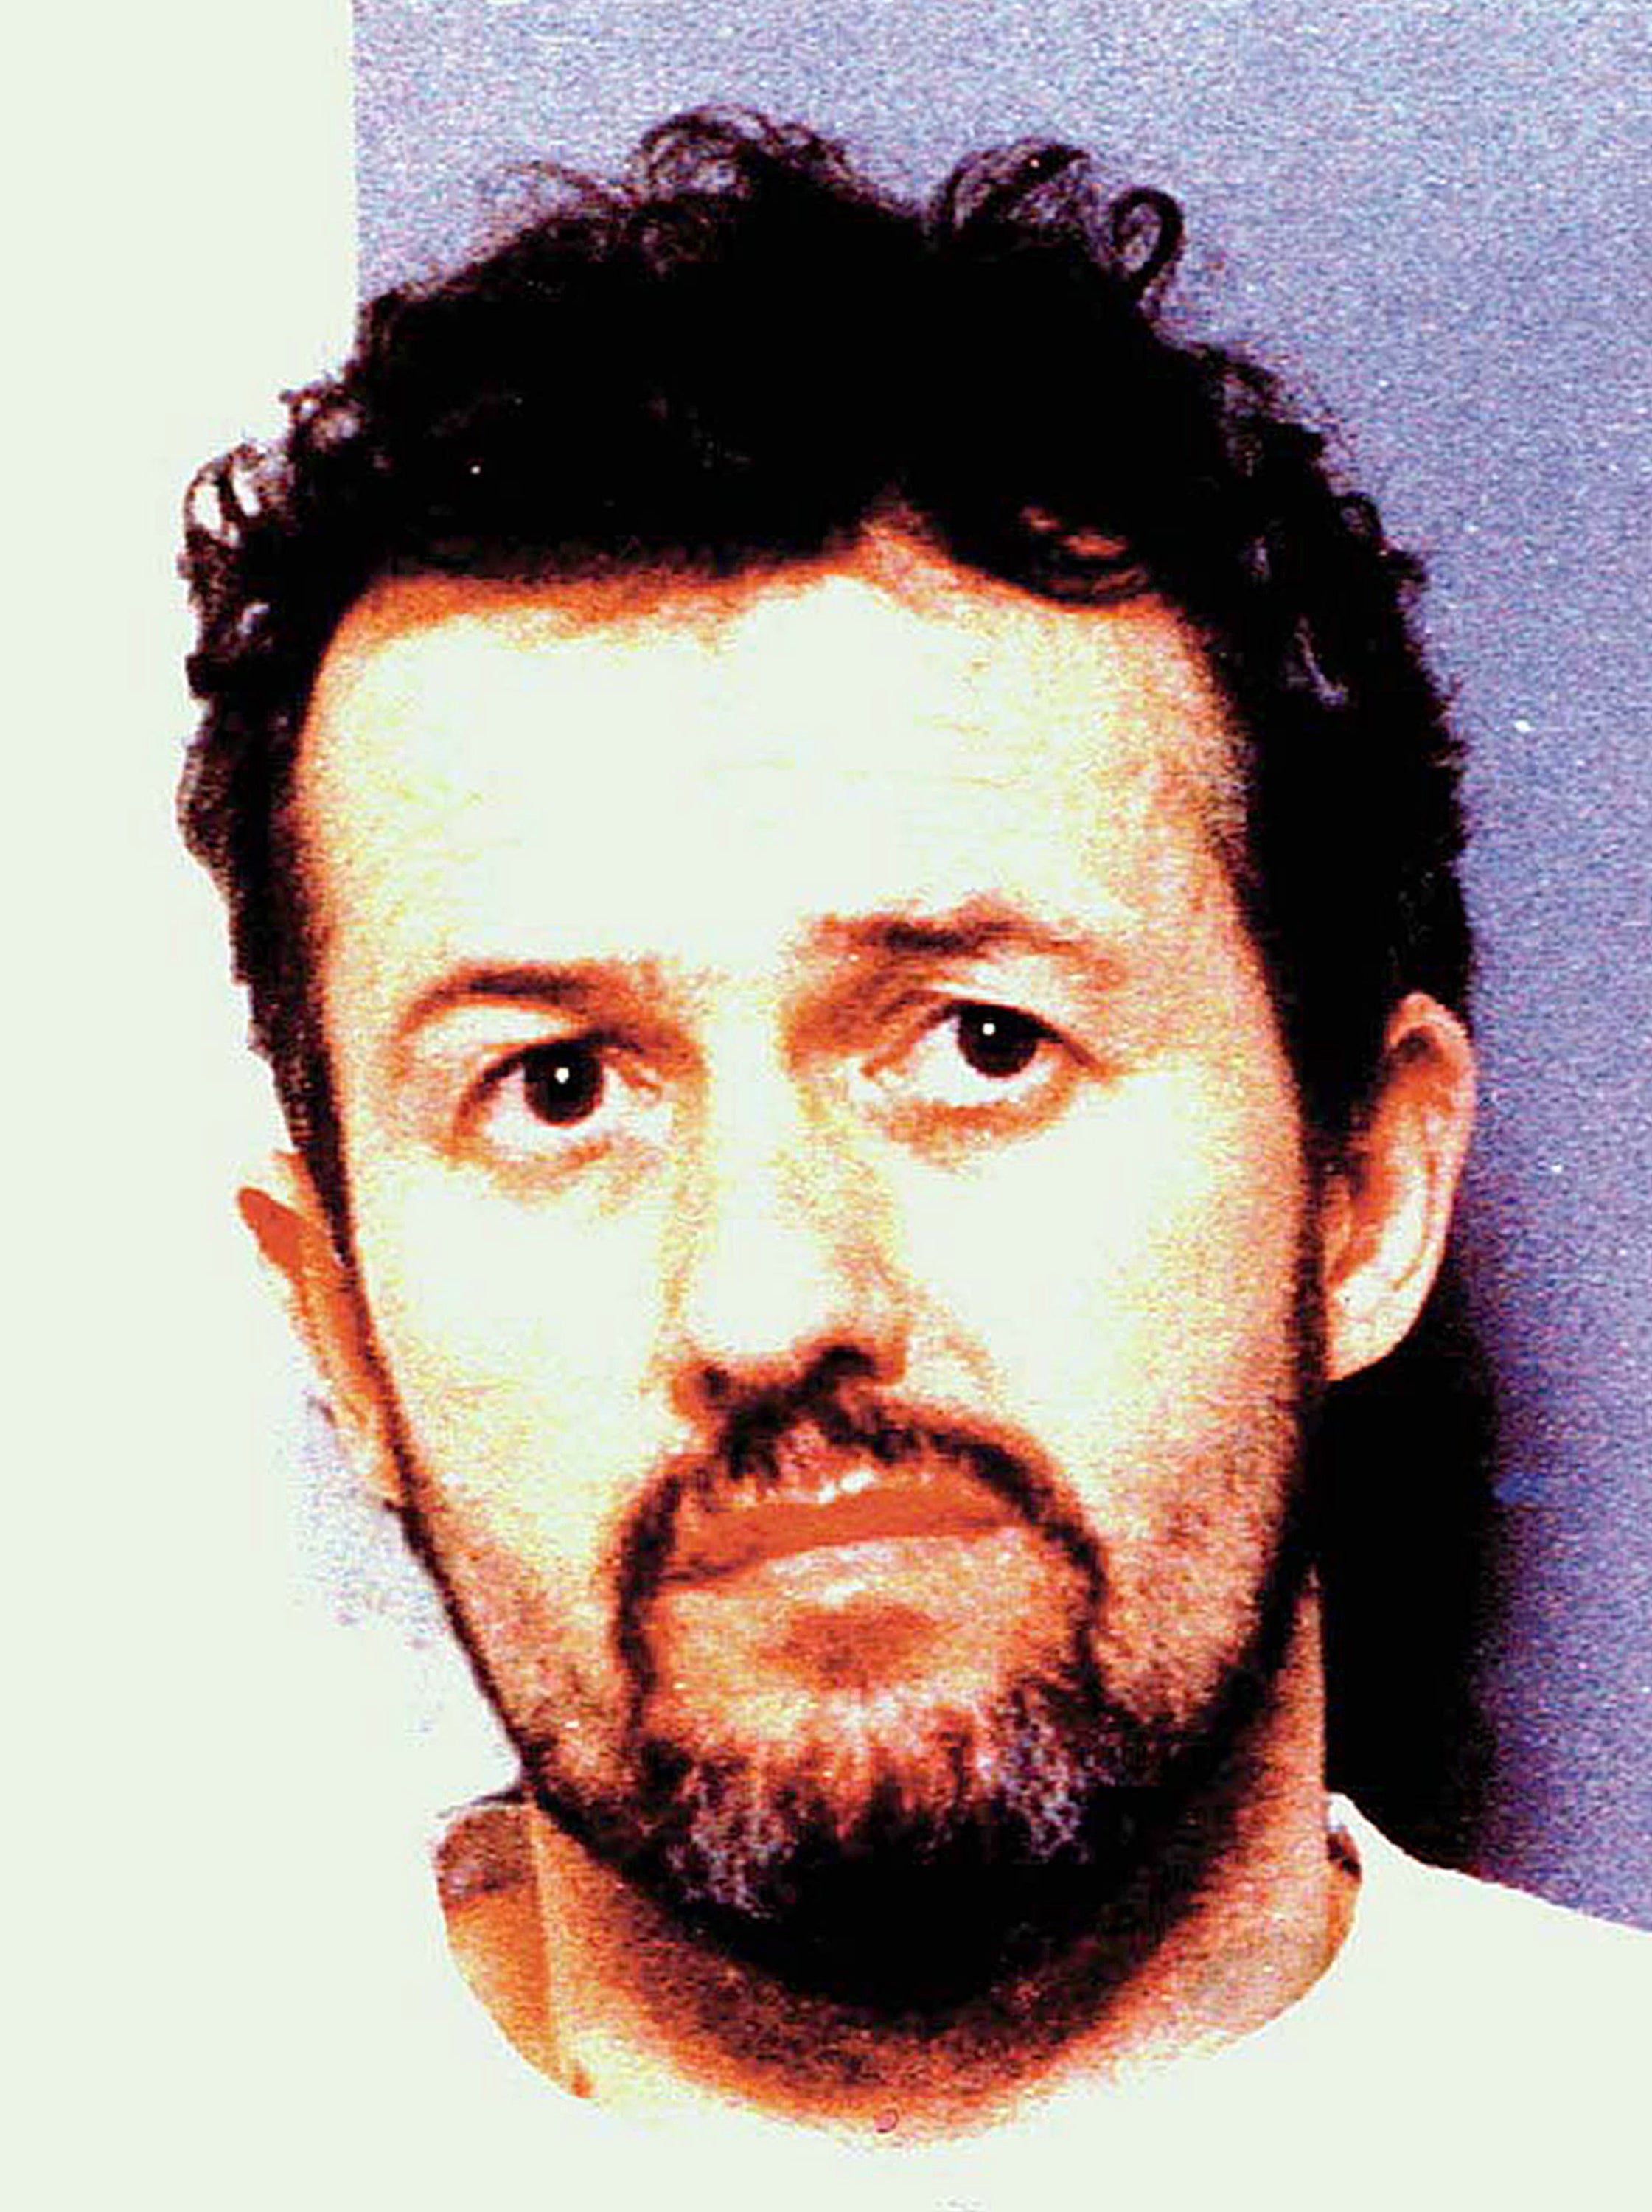 Convicted paedophile Barry Bennell told the court that he was not employed by Manchester City at the time of the offences (PA)